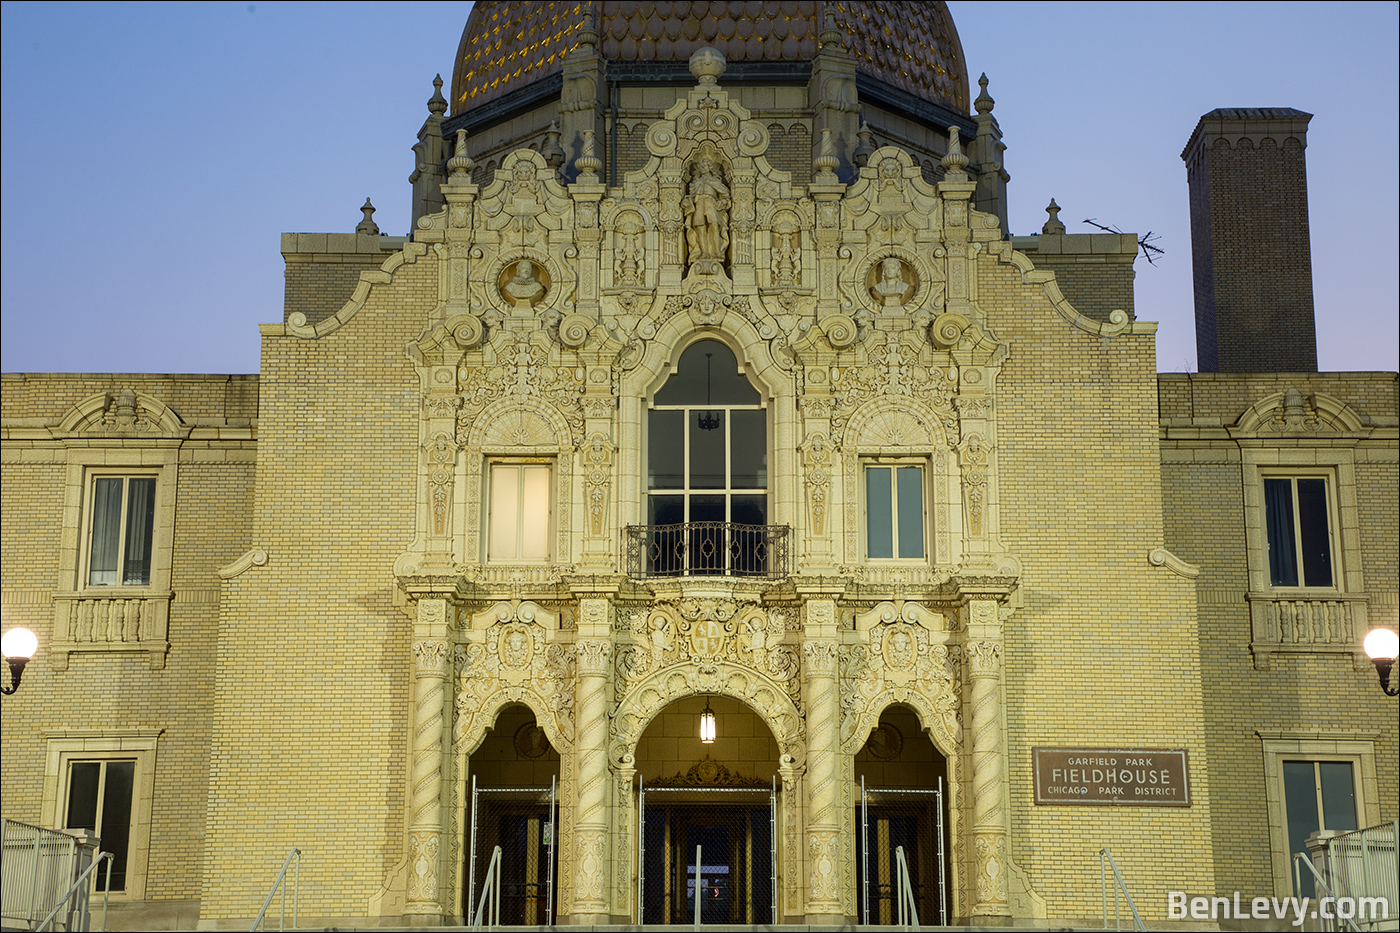 The facade on the east side of the Garfield Park Field House